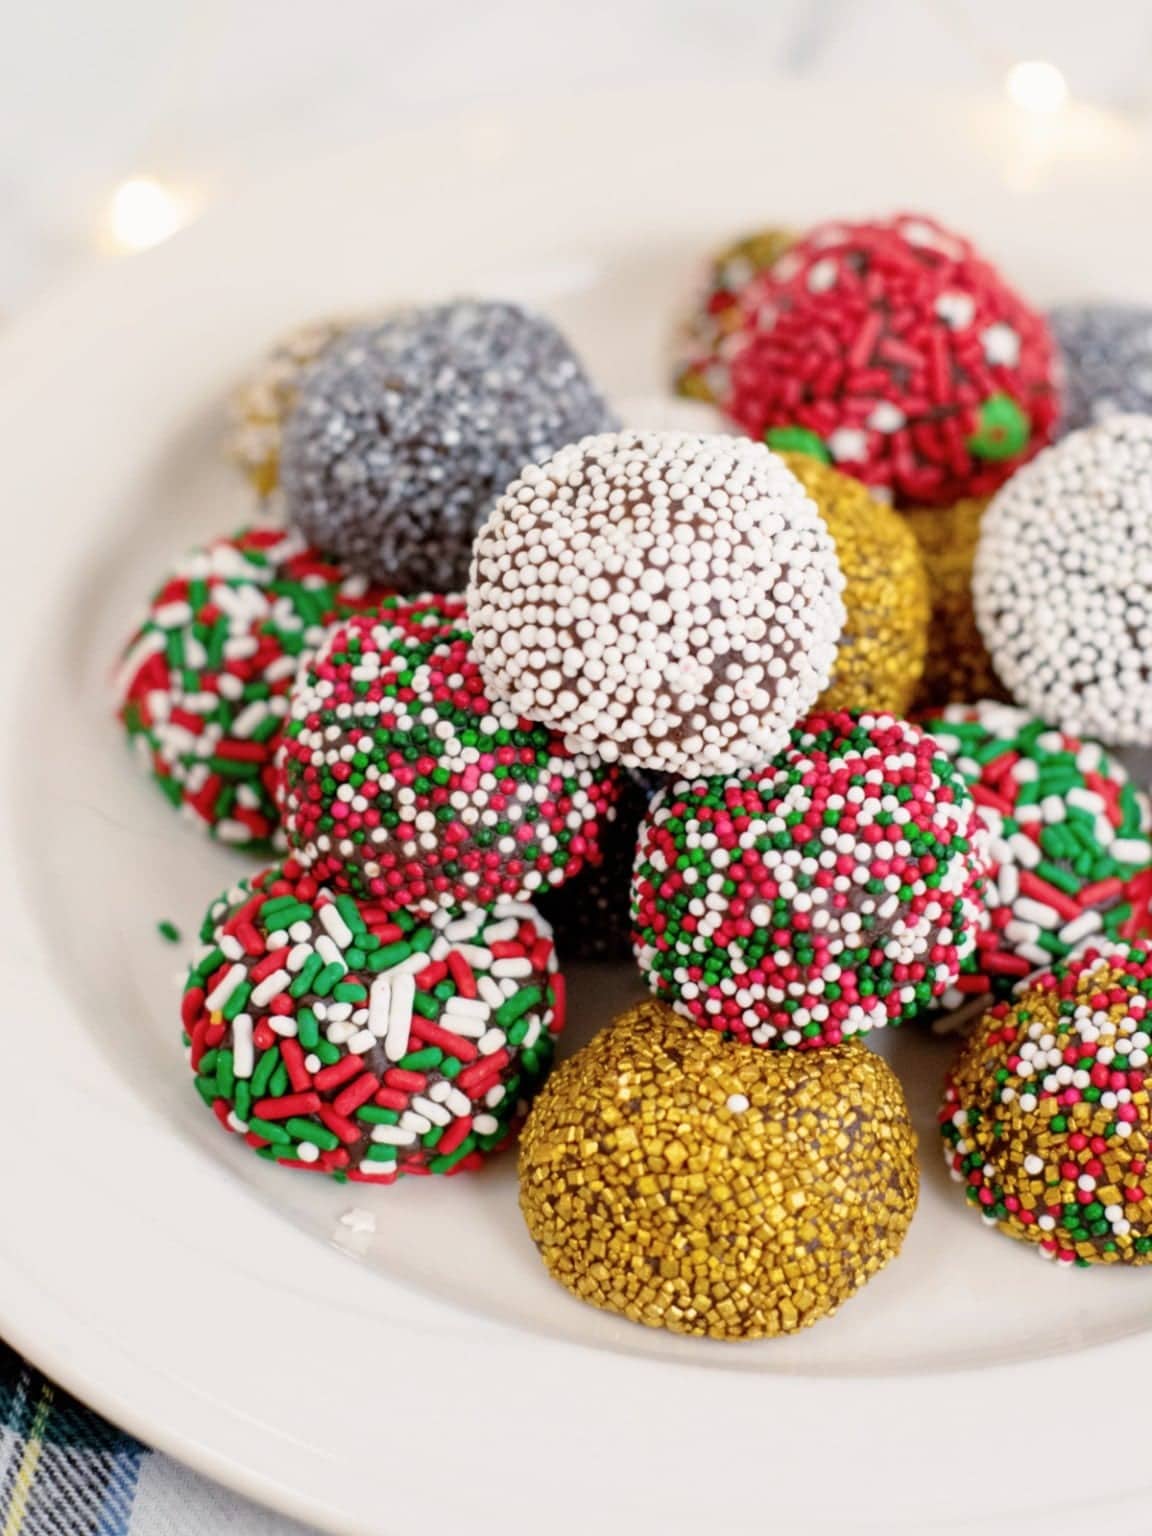 Christmas brownie truffles coated with candies and sprinkles.